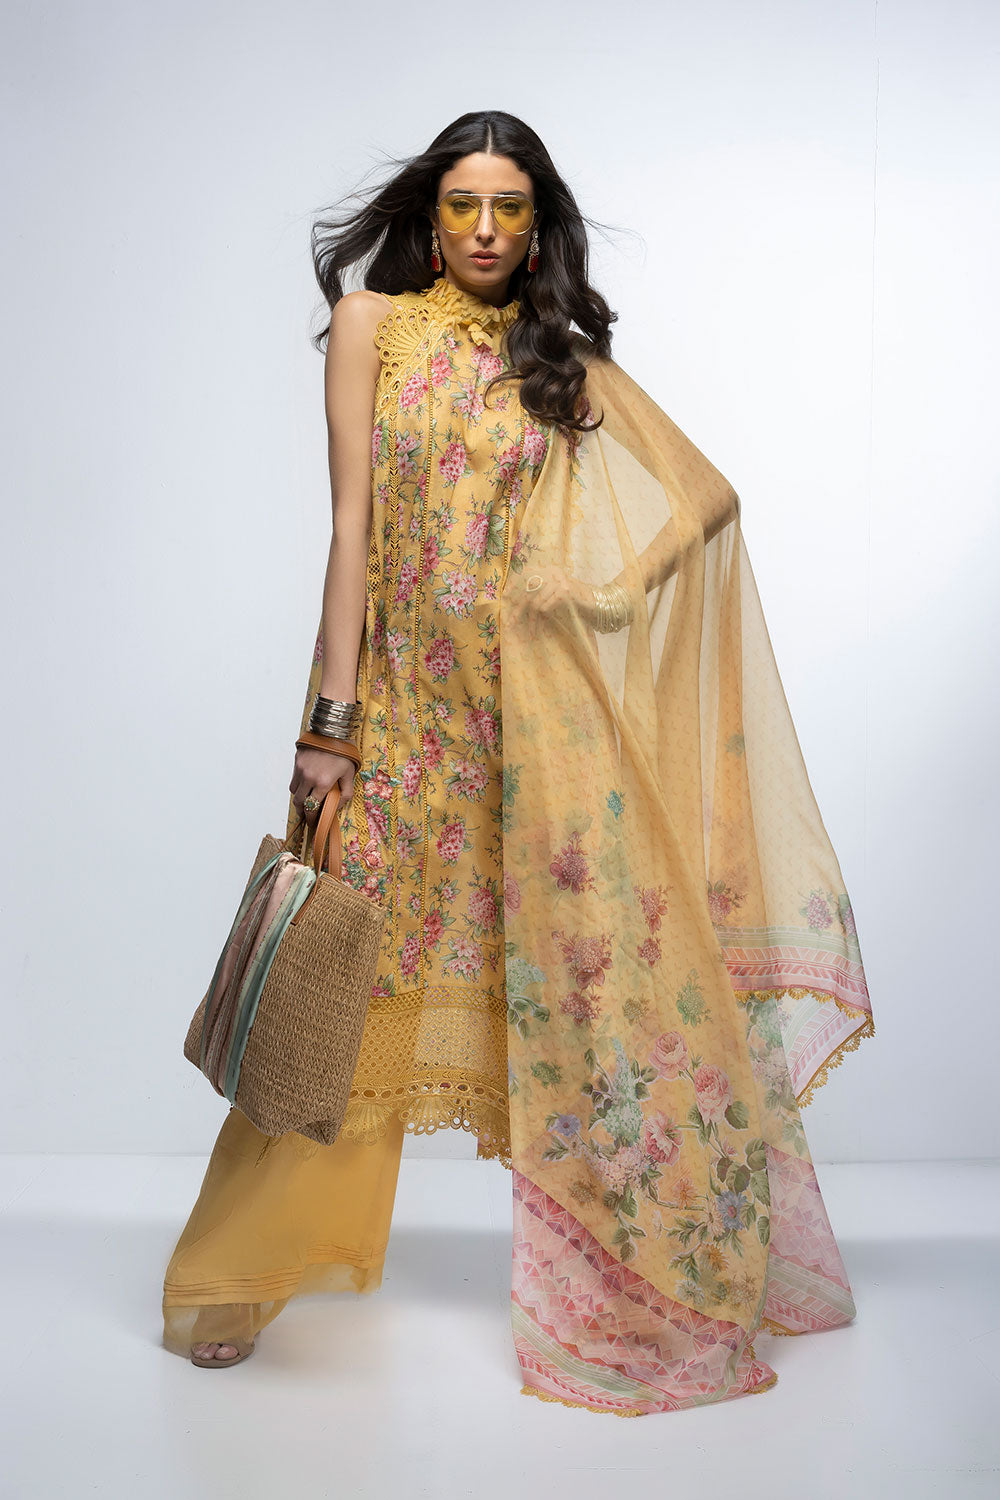 Buy Now, D#1B - Sobia Nazir Vital 2023 - Vol. 2 - Shahana Collection UK  - Wedding and Bridal Party Dresses - Sobia Nazir in UK - Summer Lawn 2023